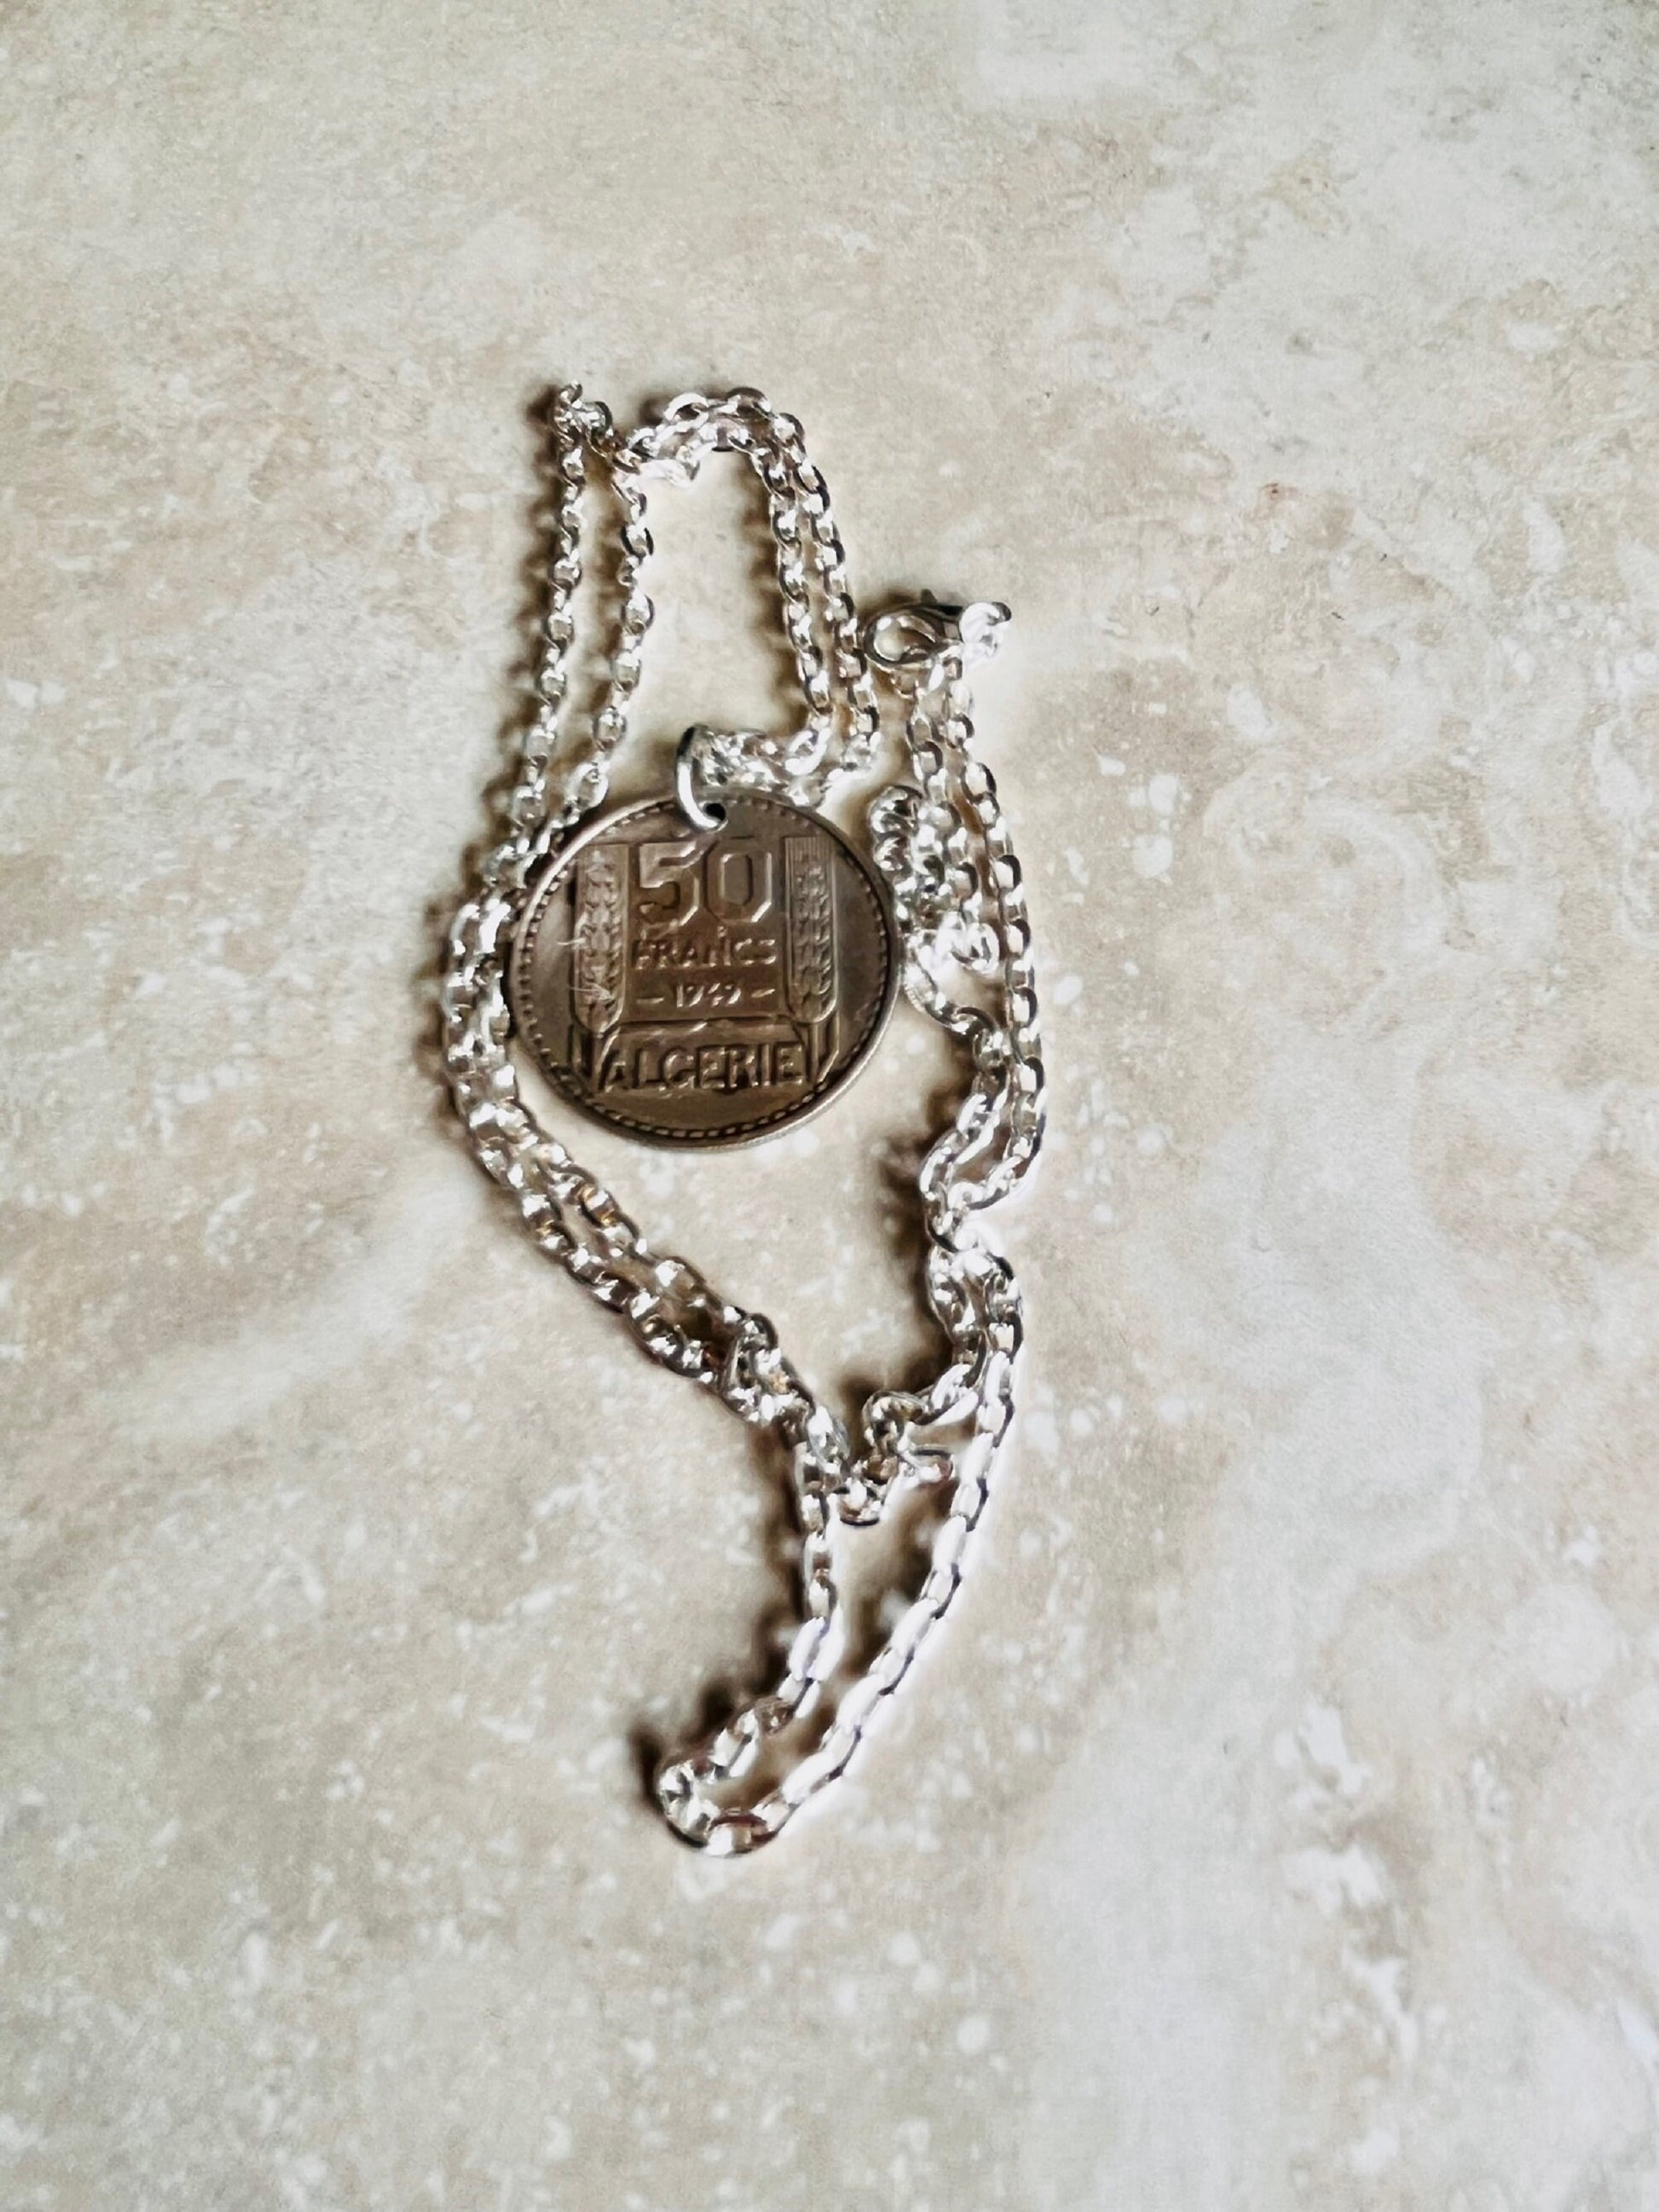 France Coin Necklace French 50 Franc Liberte Egalite Fraternite Personal Pendant Jewelry Gift Friend Charm For Him Her World Coin Collector